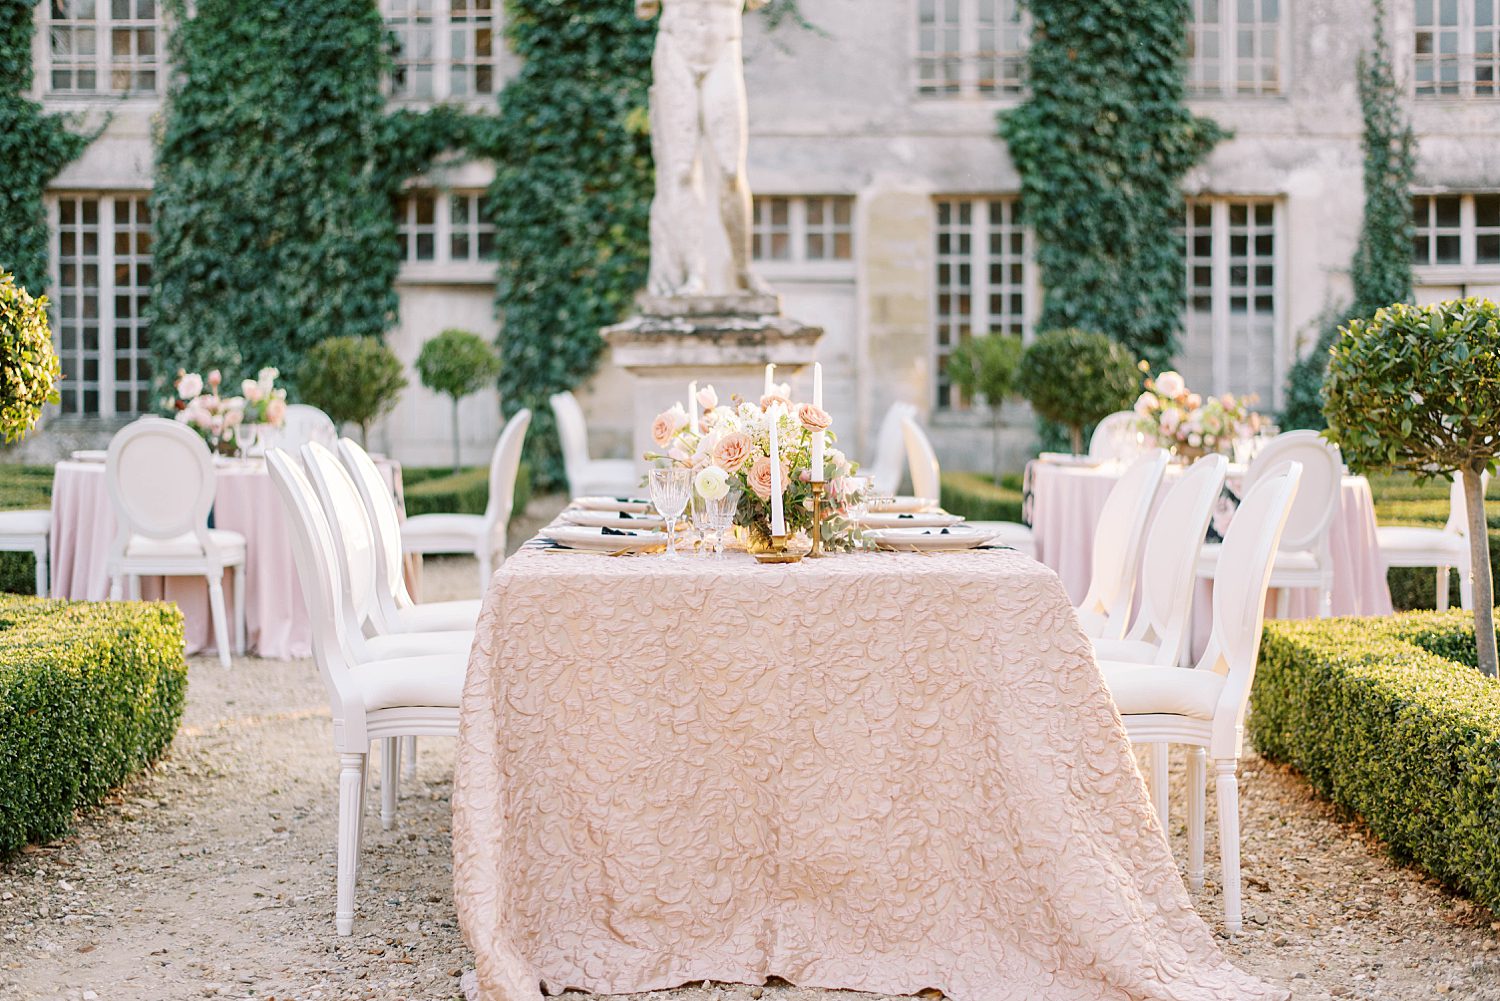 reception table with rose gold table cloth at Chateau de Villette